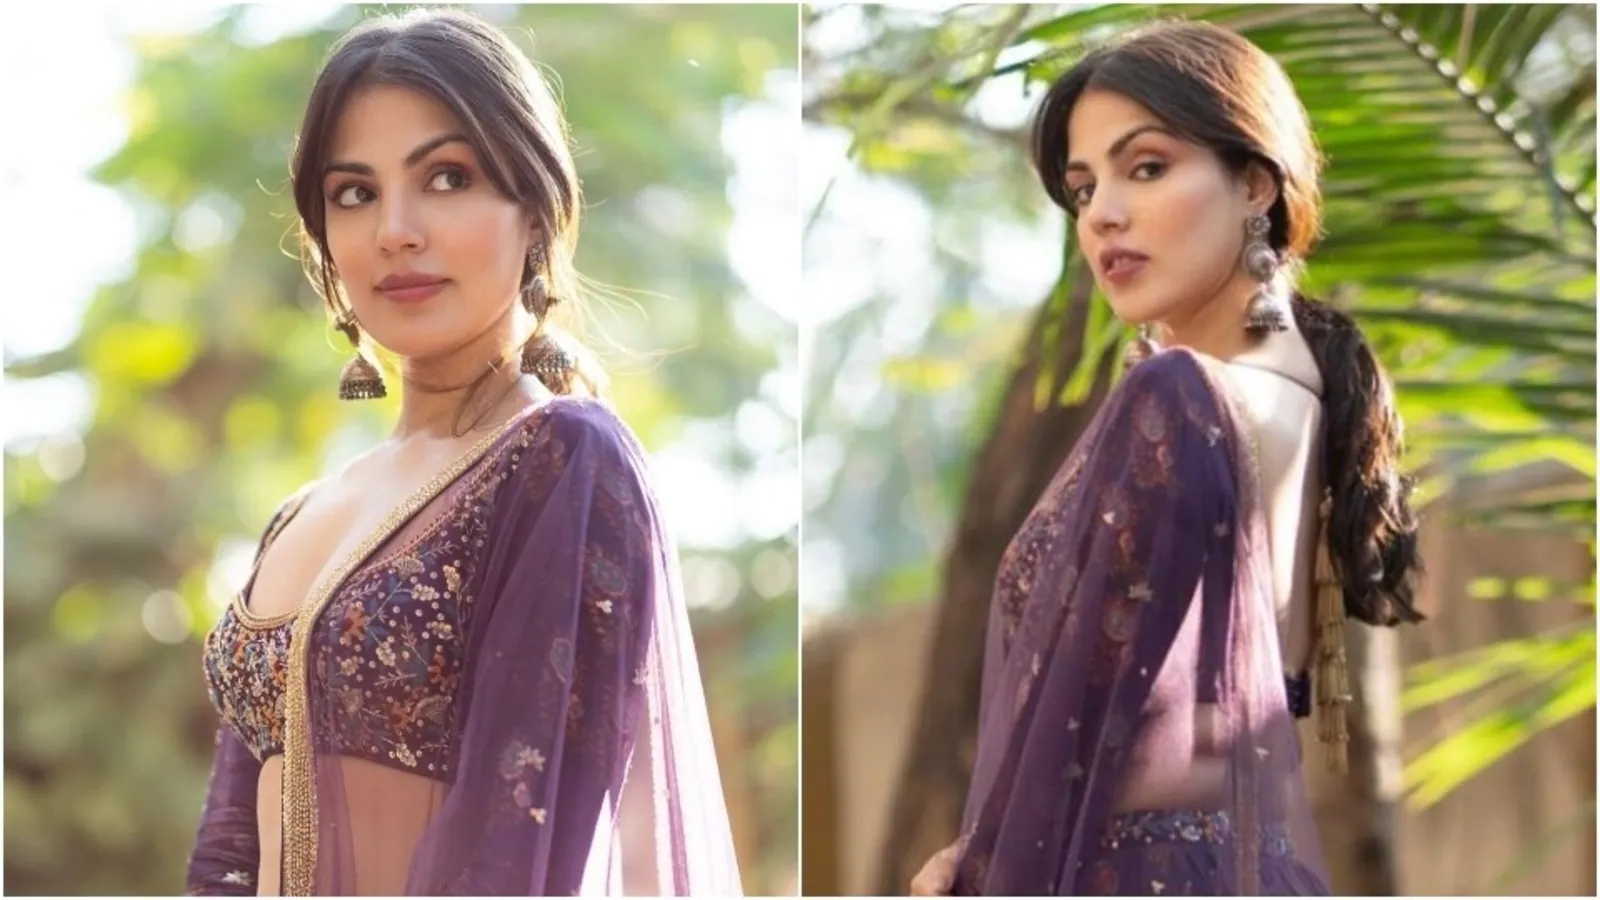 Rhea Chakraborty is on her way to ‘become a butterfly’ in pretty purple lehenga, it costs ₹29k: Check out pics